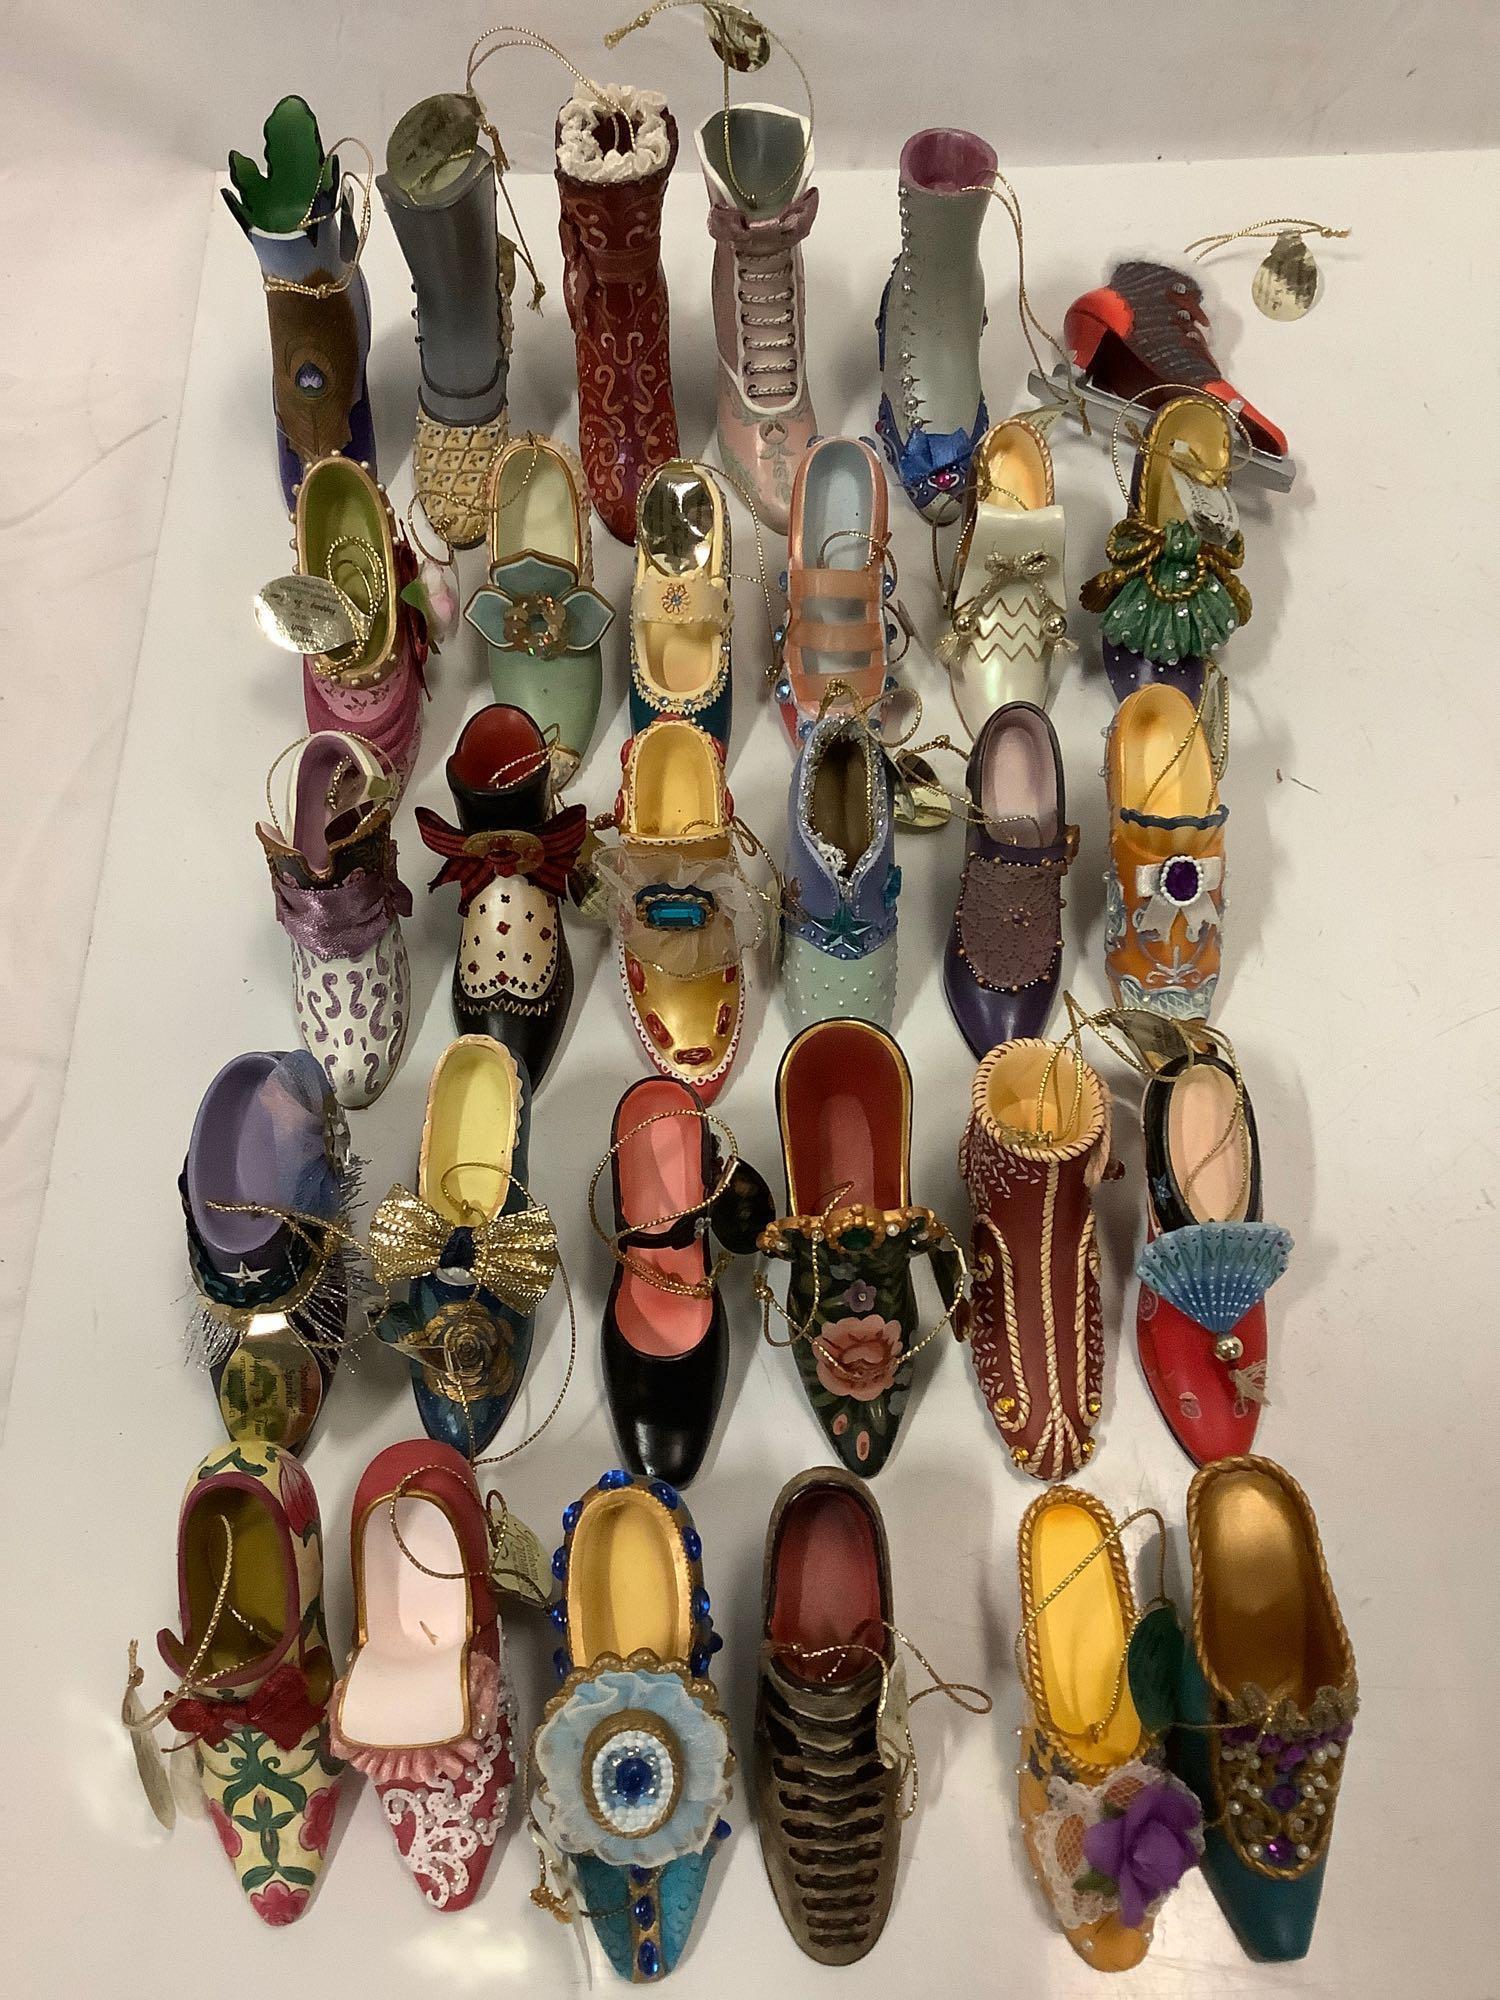 30 pc. lot of Ashton-Drake Galleries Heirloom Ornaments w/ tags, fancy ladies shoes/ boots